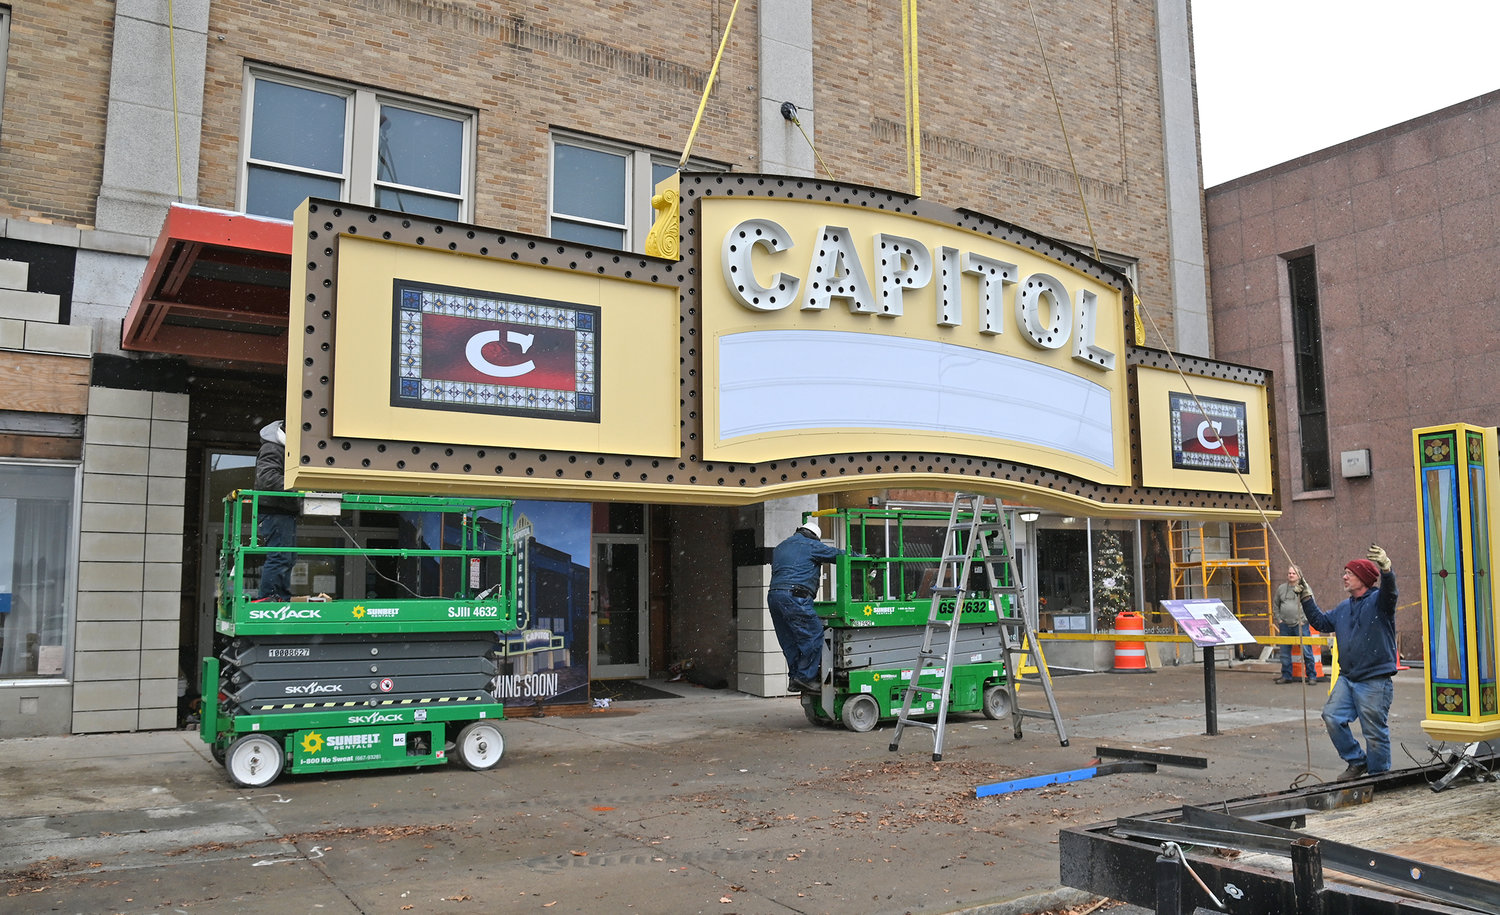 Installation of the new recreated marquee is installed by Wagner Electric Signs at Capitol Theatre, and included the 45 1/2 foot “blade” sign. The official unveiling of the new marquee that had been almost 20 years in the works, was held in January.